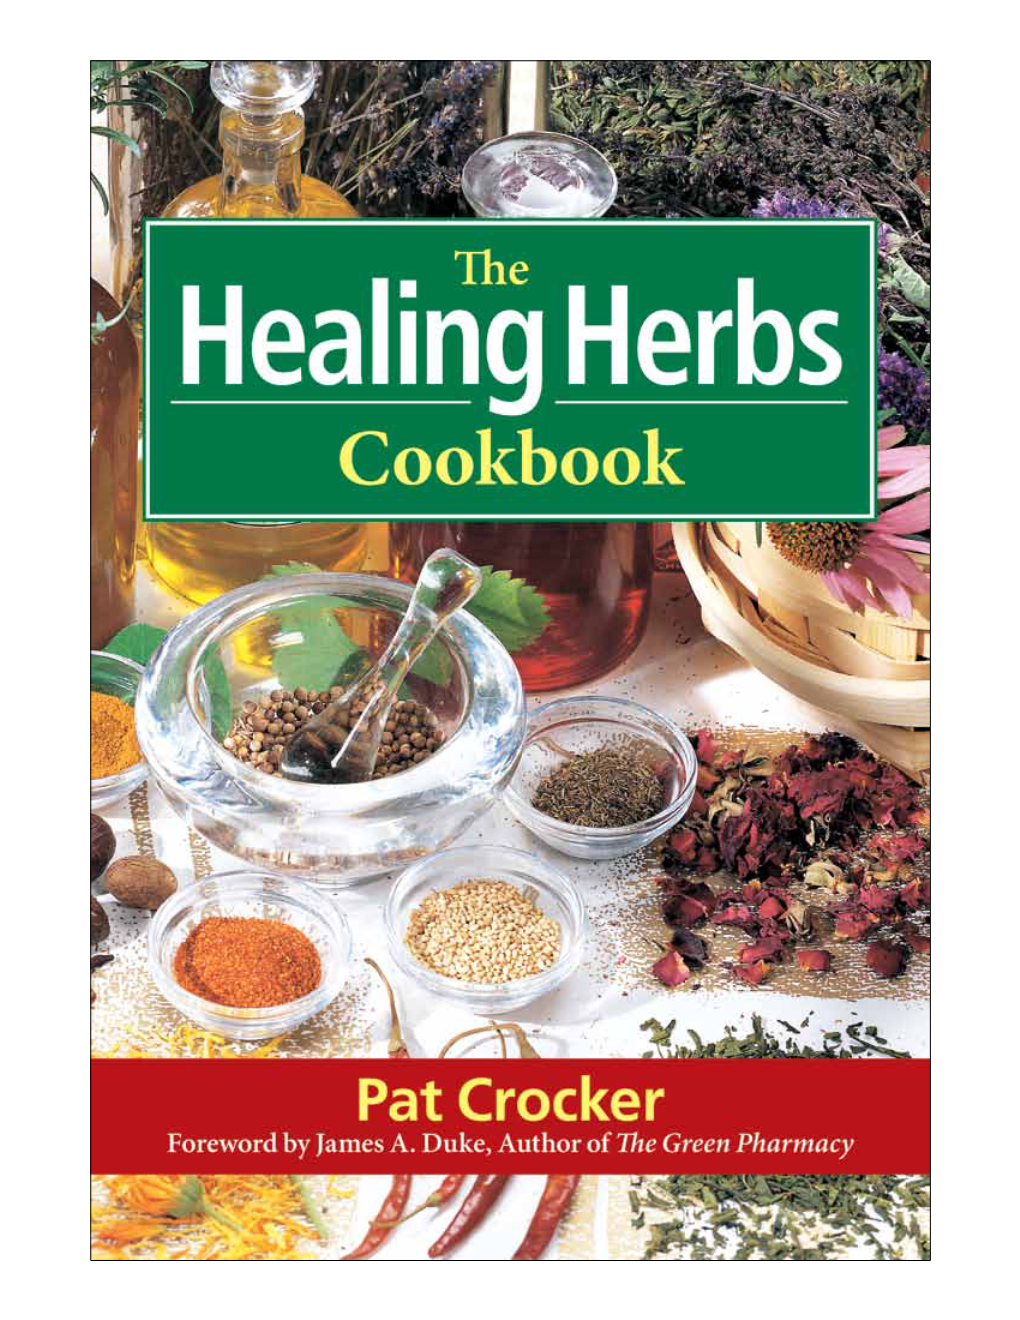 E Healing Herbs Cookbook Acknowledgements Soups Barley and Vegetable Ragout Cauliﬂower and Wheat Berries Foreword by James A